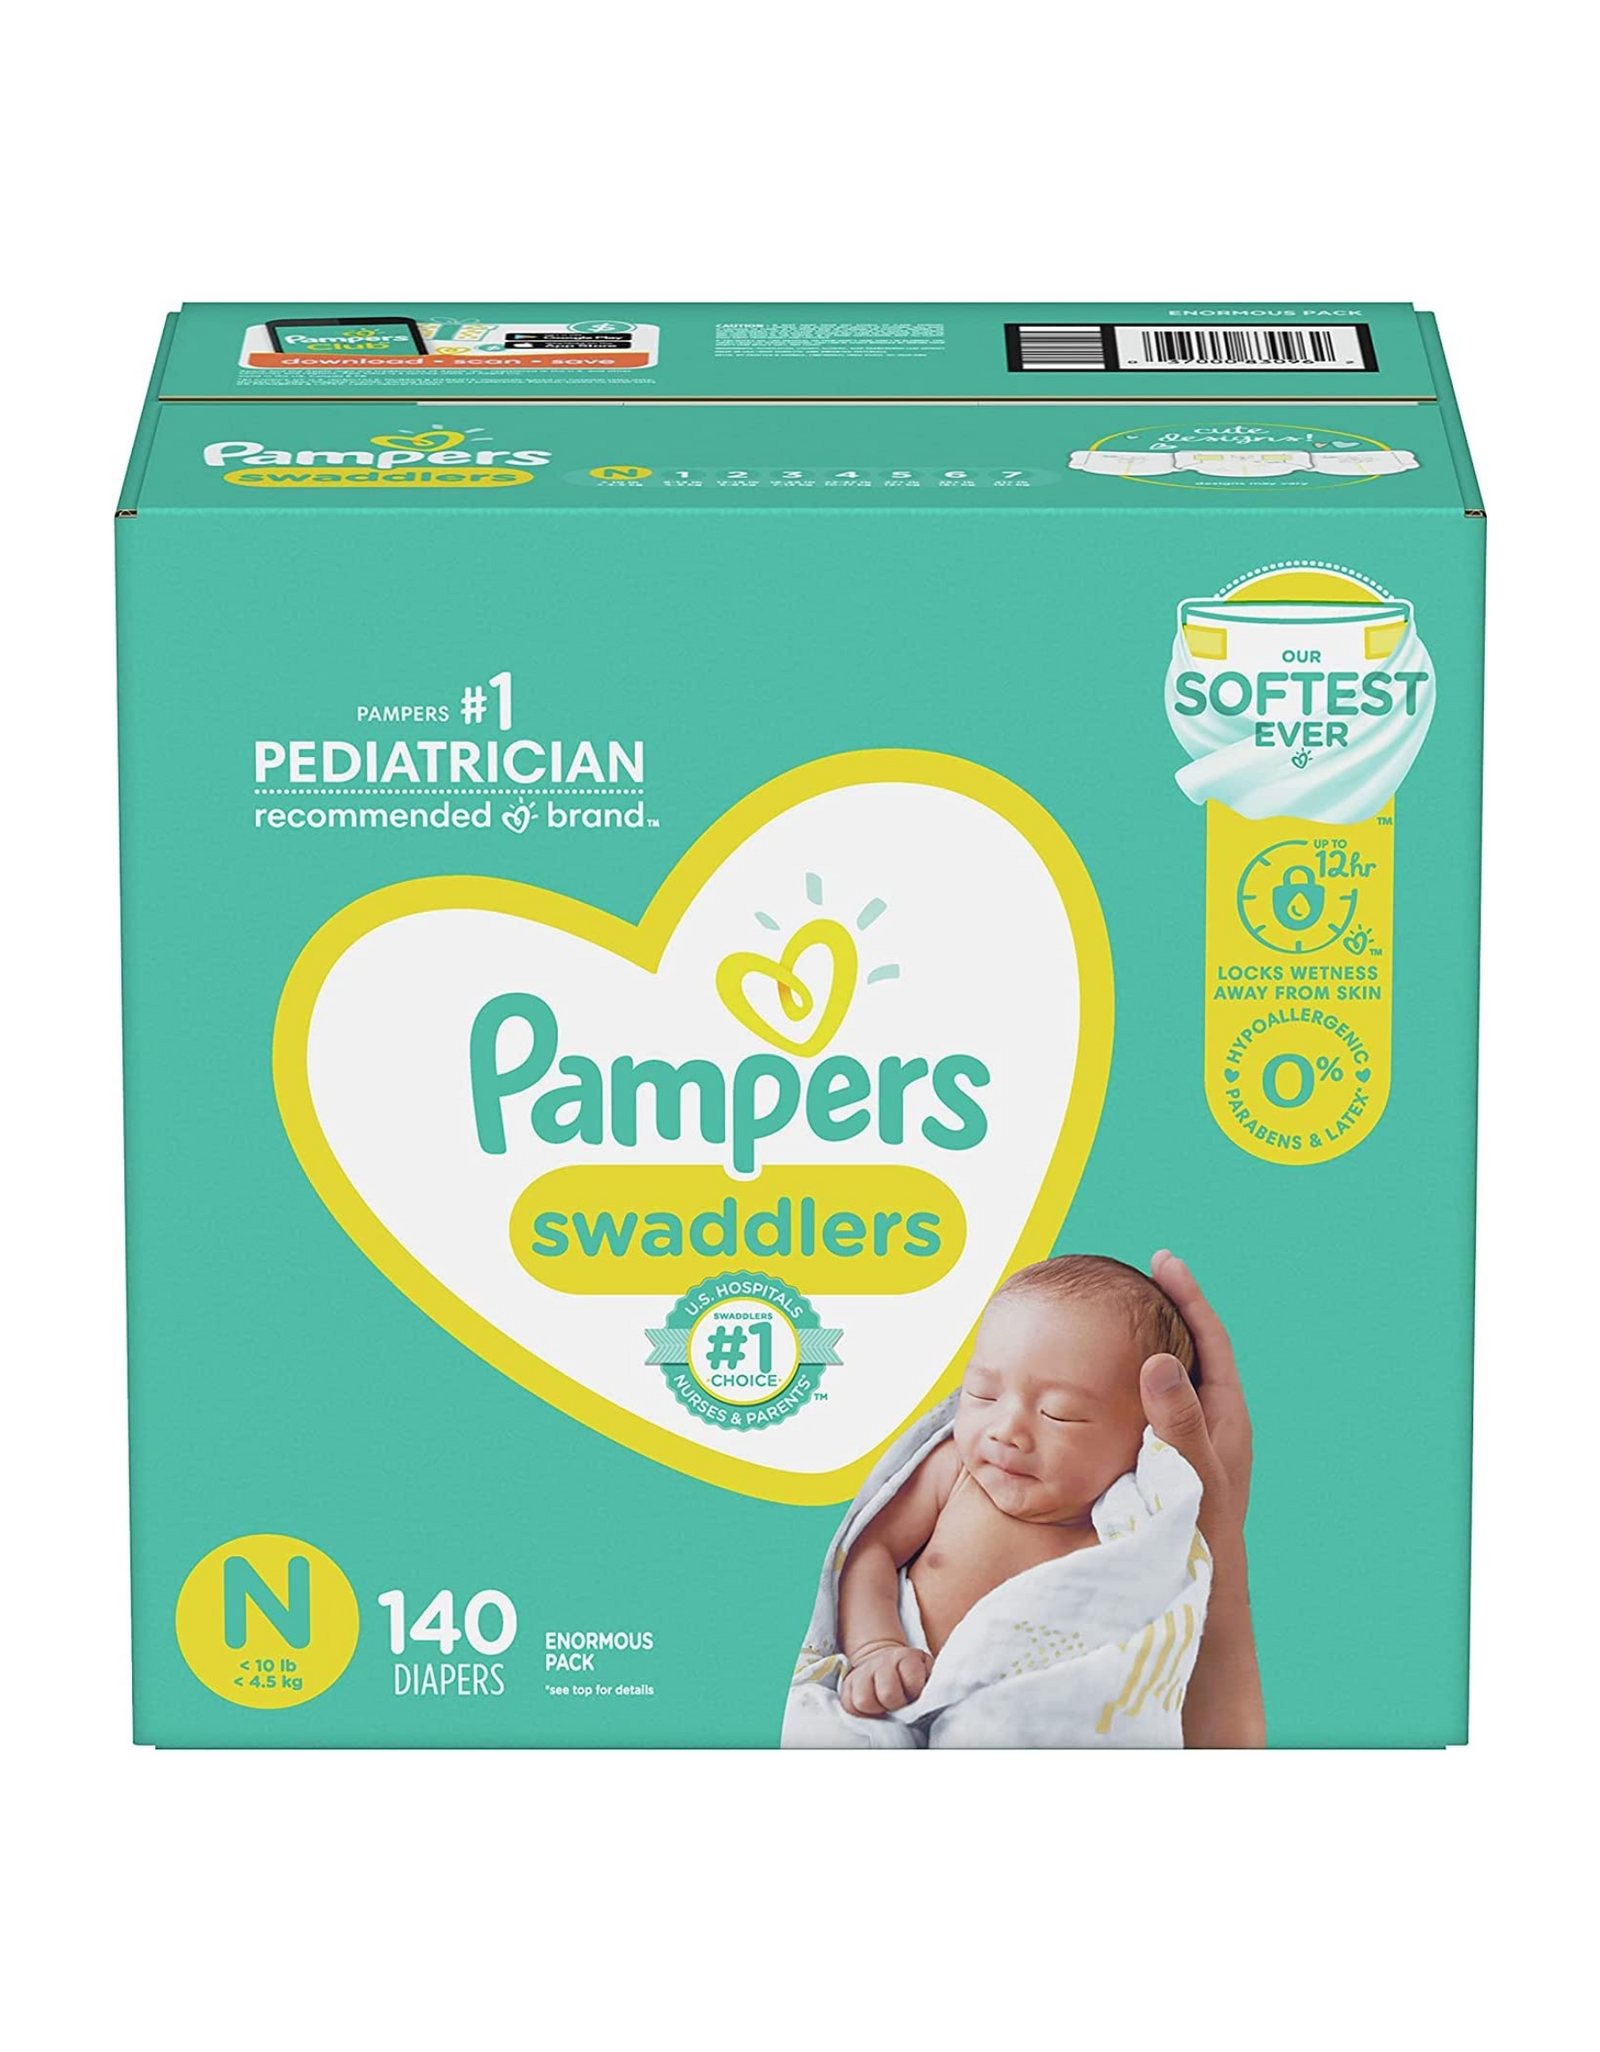 Diapers Newborn/Size 0 (< 10 lb) - Pampers Swaddlers Baby Diapers, 140 Ct (Packaging May Vary)